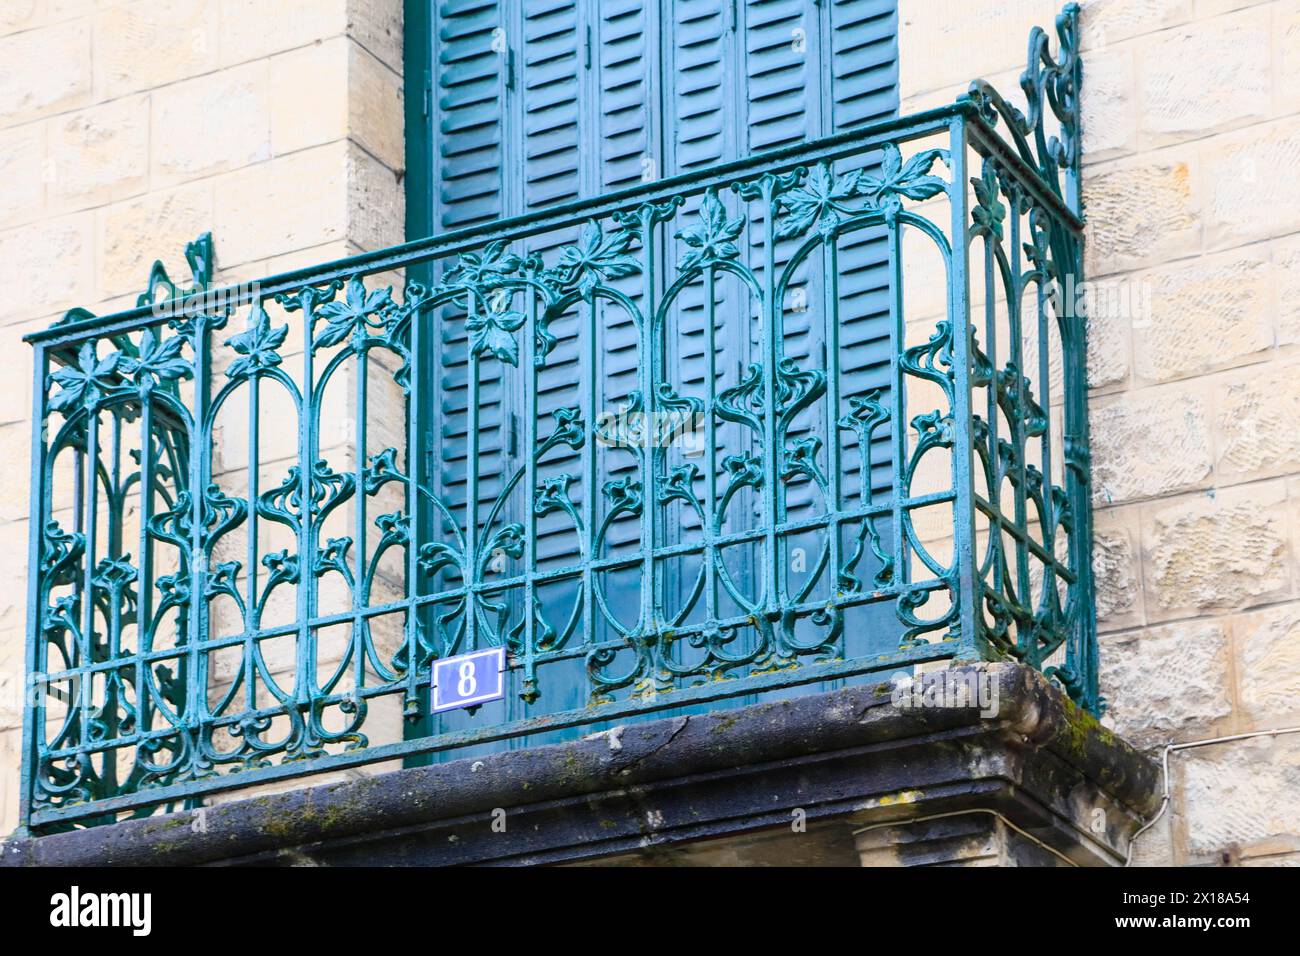 Window railings and balconies on residential buildings designed by Hector Guimard in the Art Nouveau style and produced in the municipal metal Stock Photo